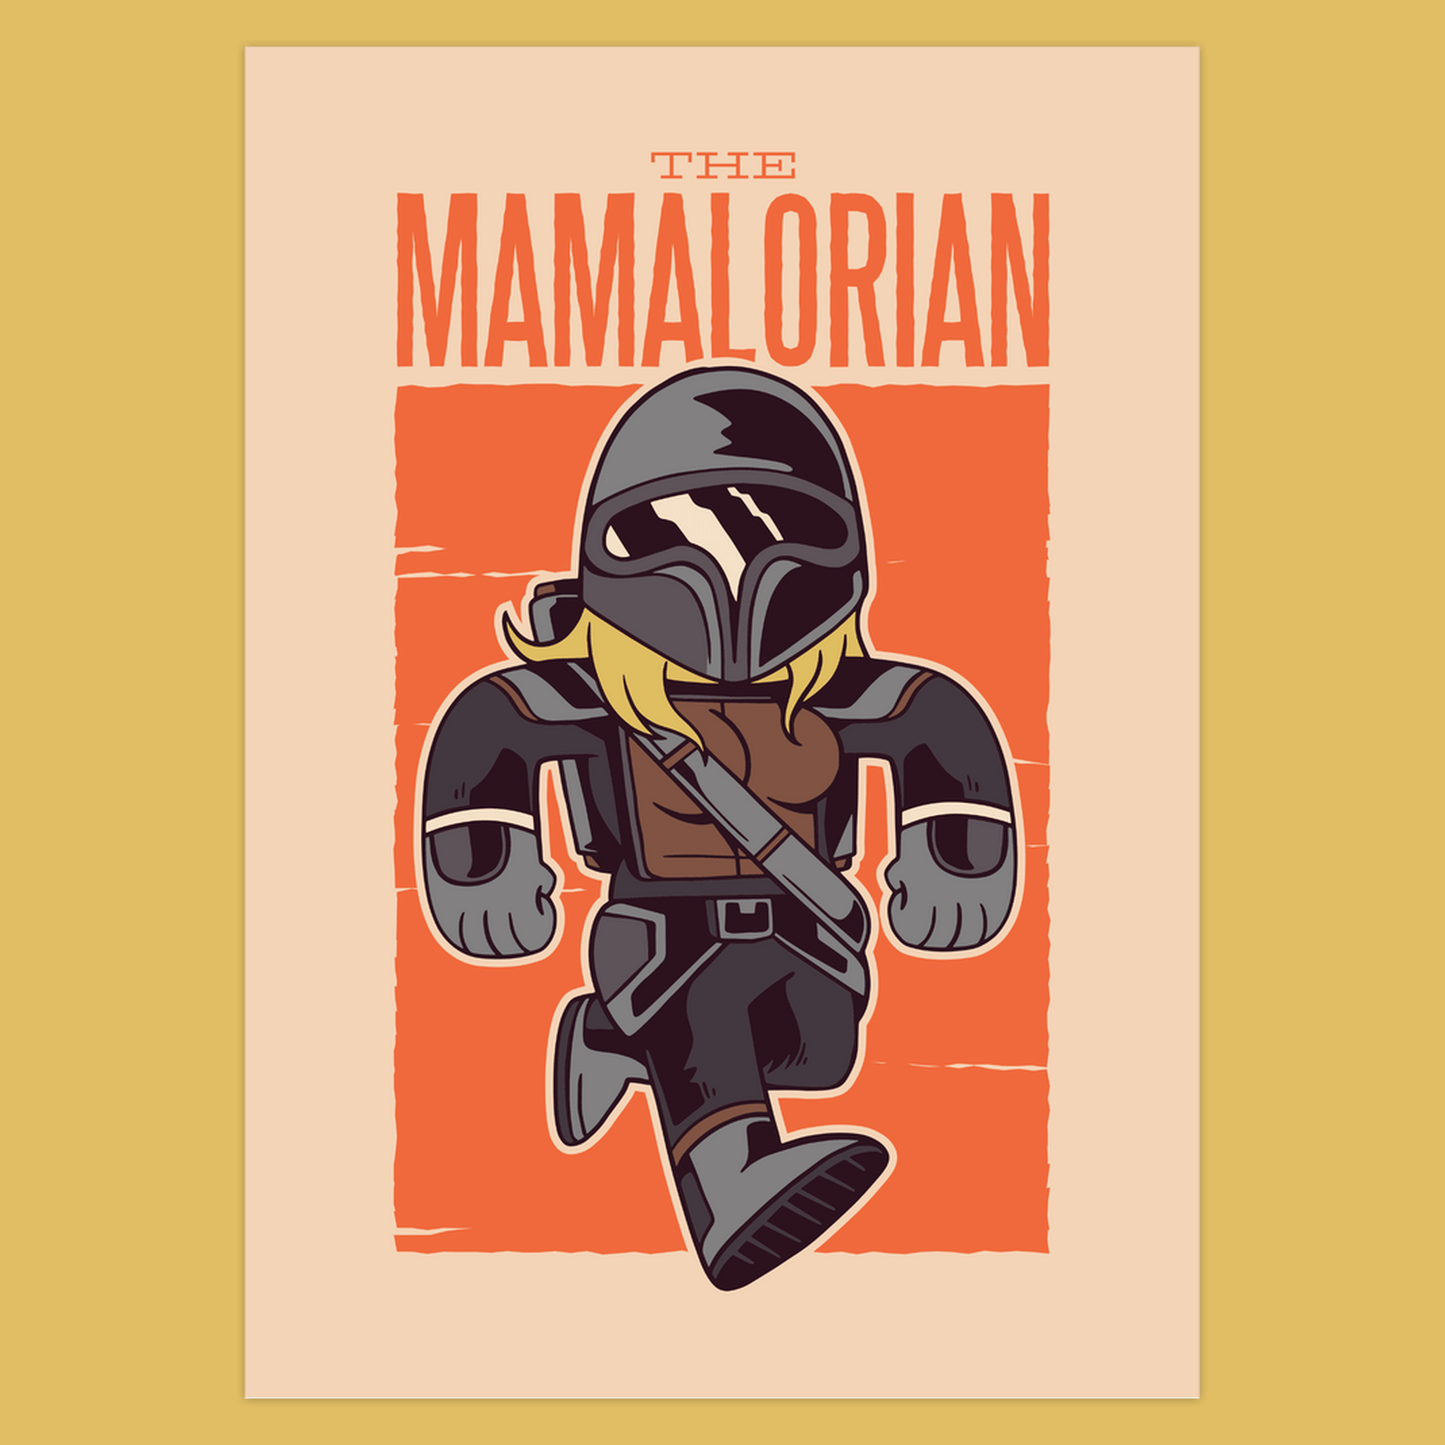 The Mamalorian (Folded Funny Mothers Day Card) Fun Gift For Sci-Fi Moms 120# Silk Cover / 5x7 inch / 1 Card